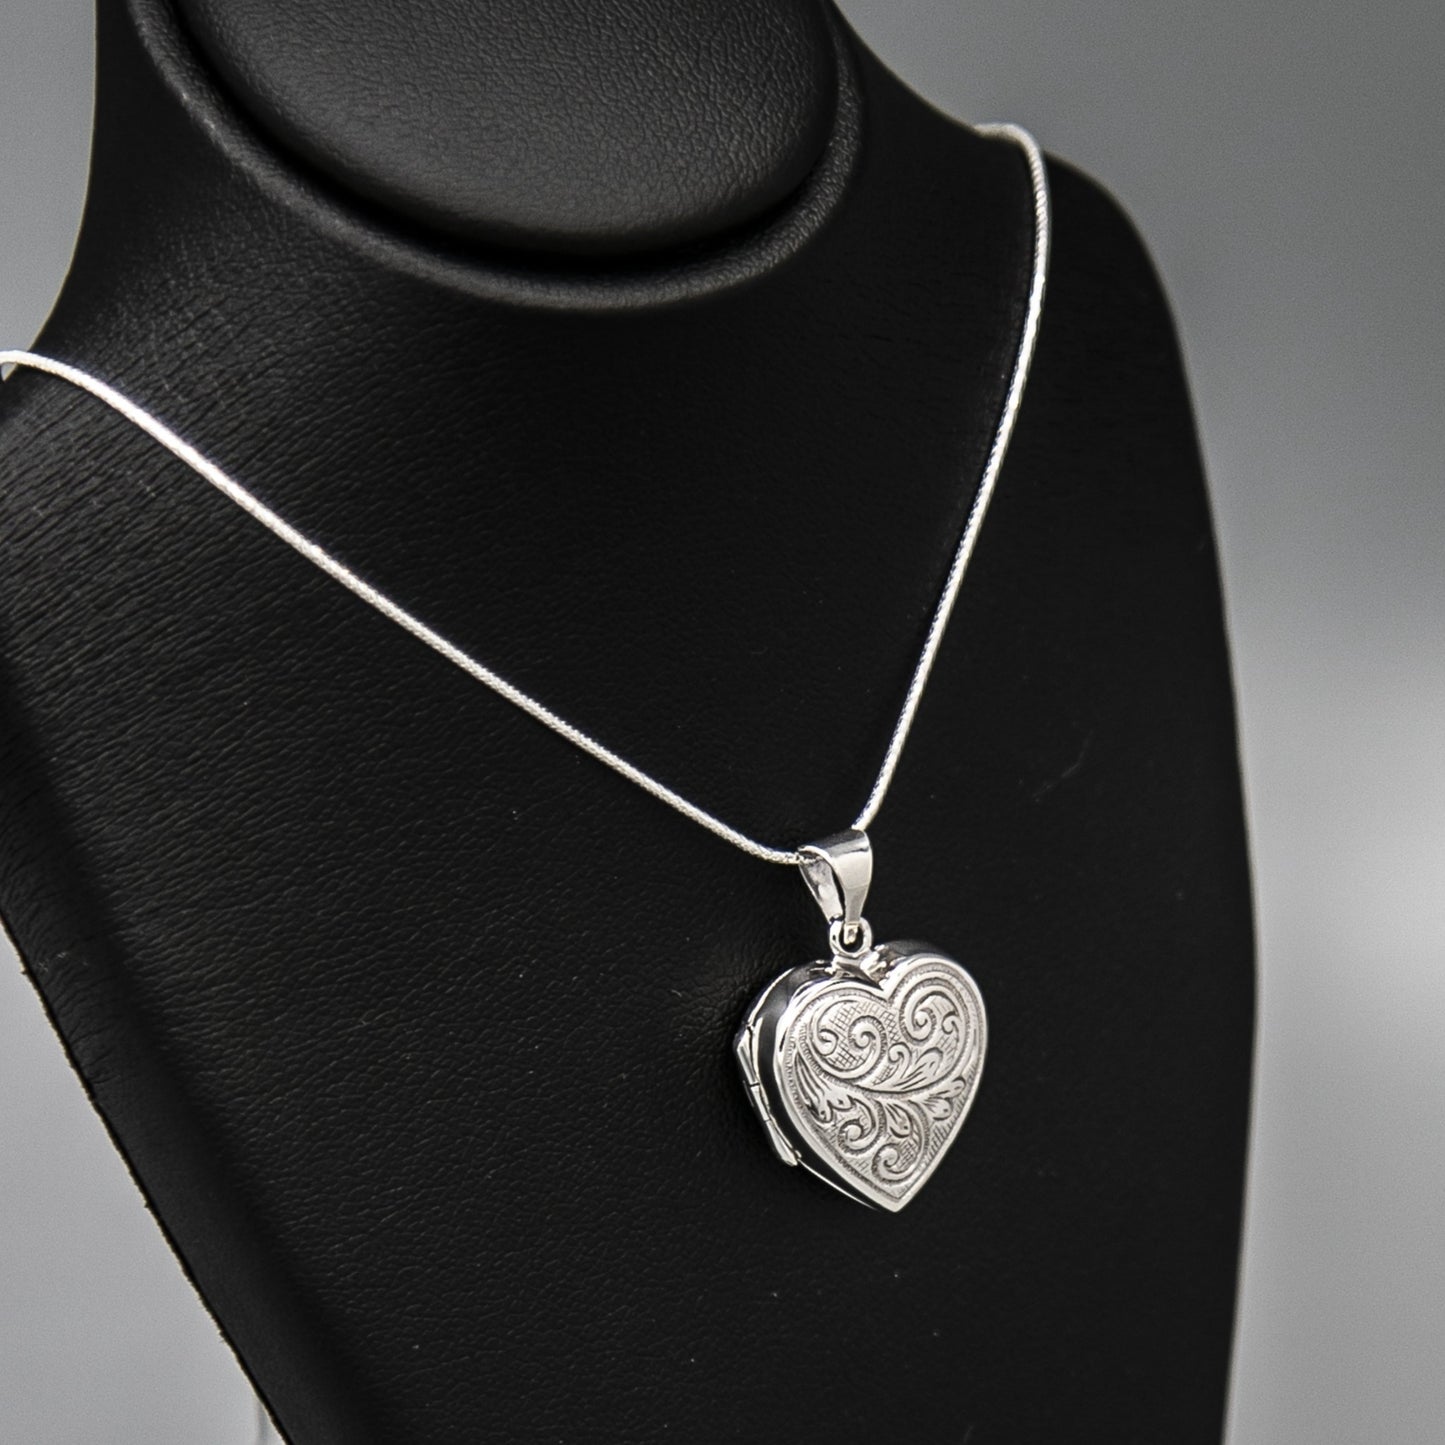 Silver heart-shaped photo locket pendant with embellishment on silver chain displayed on black